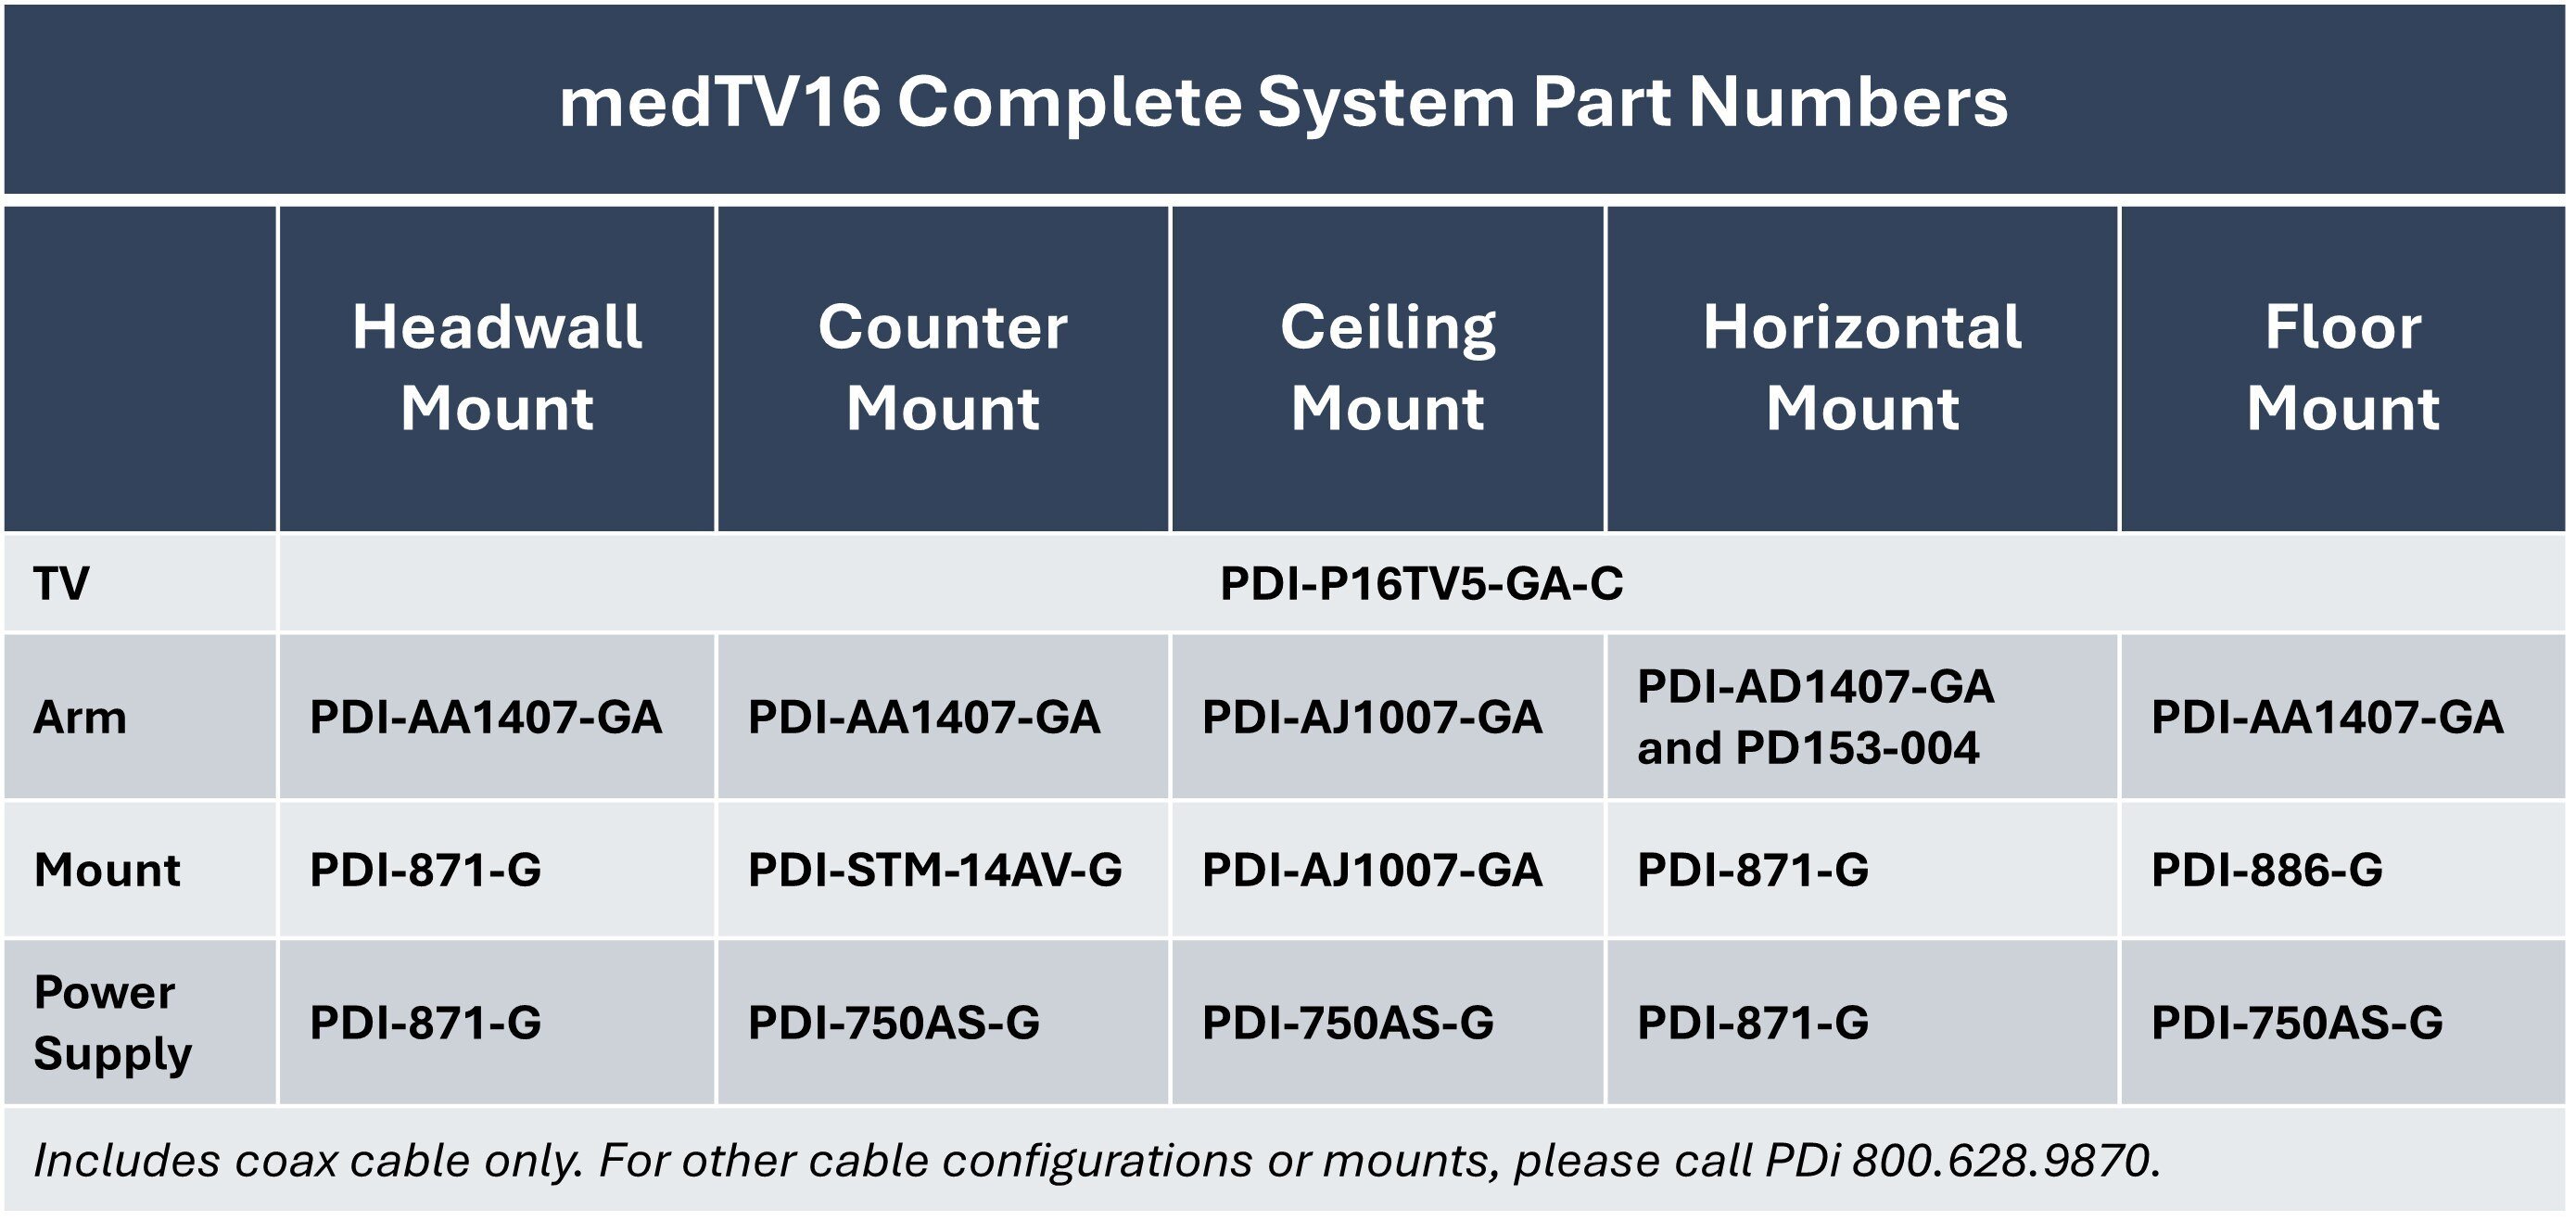 PDi Part Numbers for Complete medTV16 Personal Patient TV